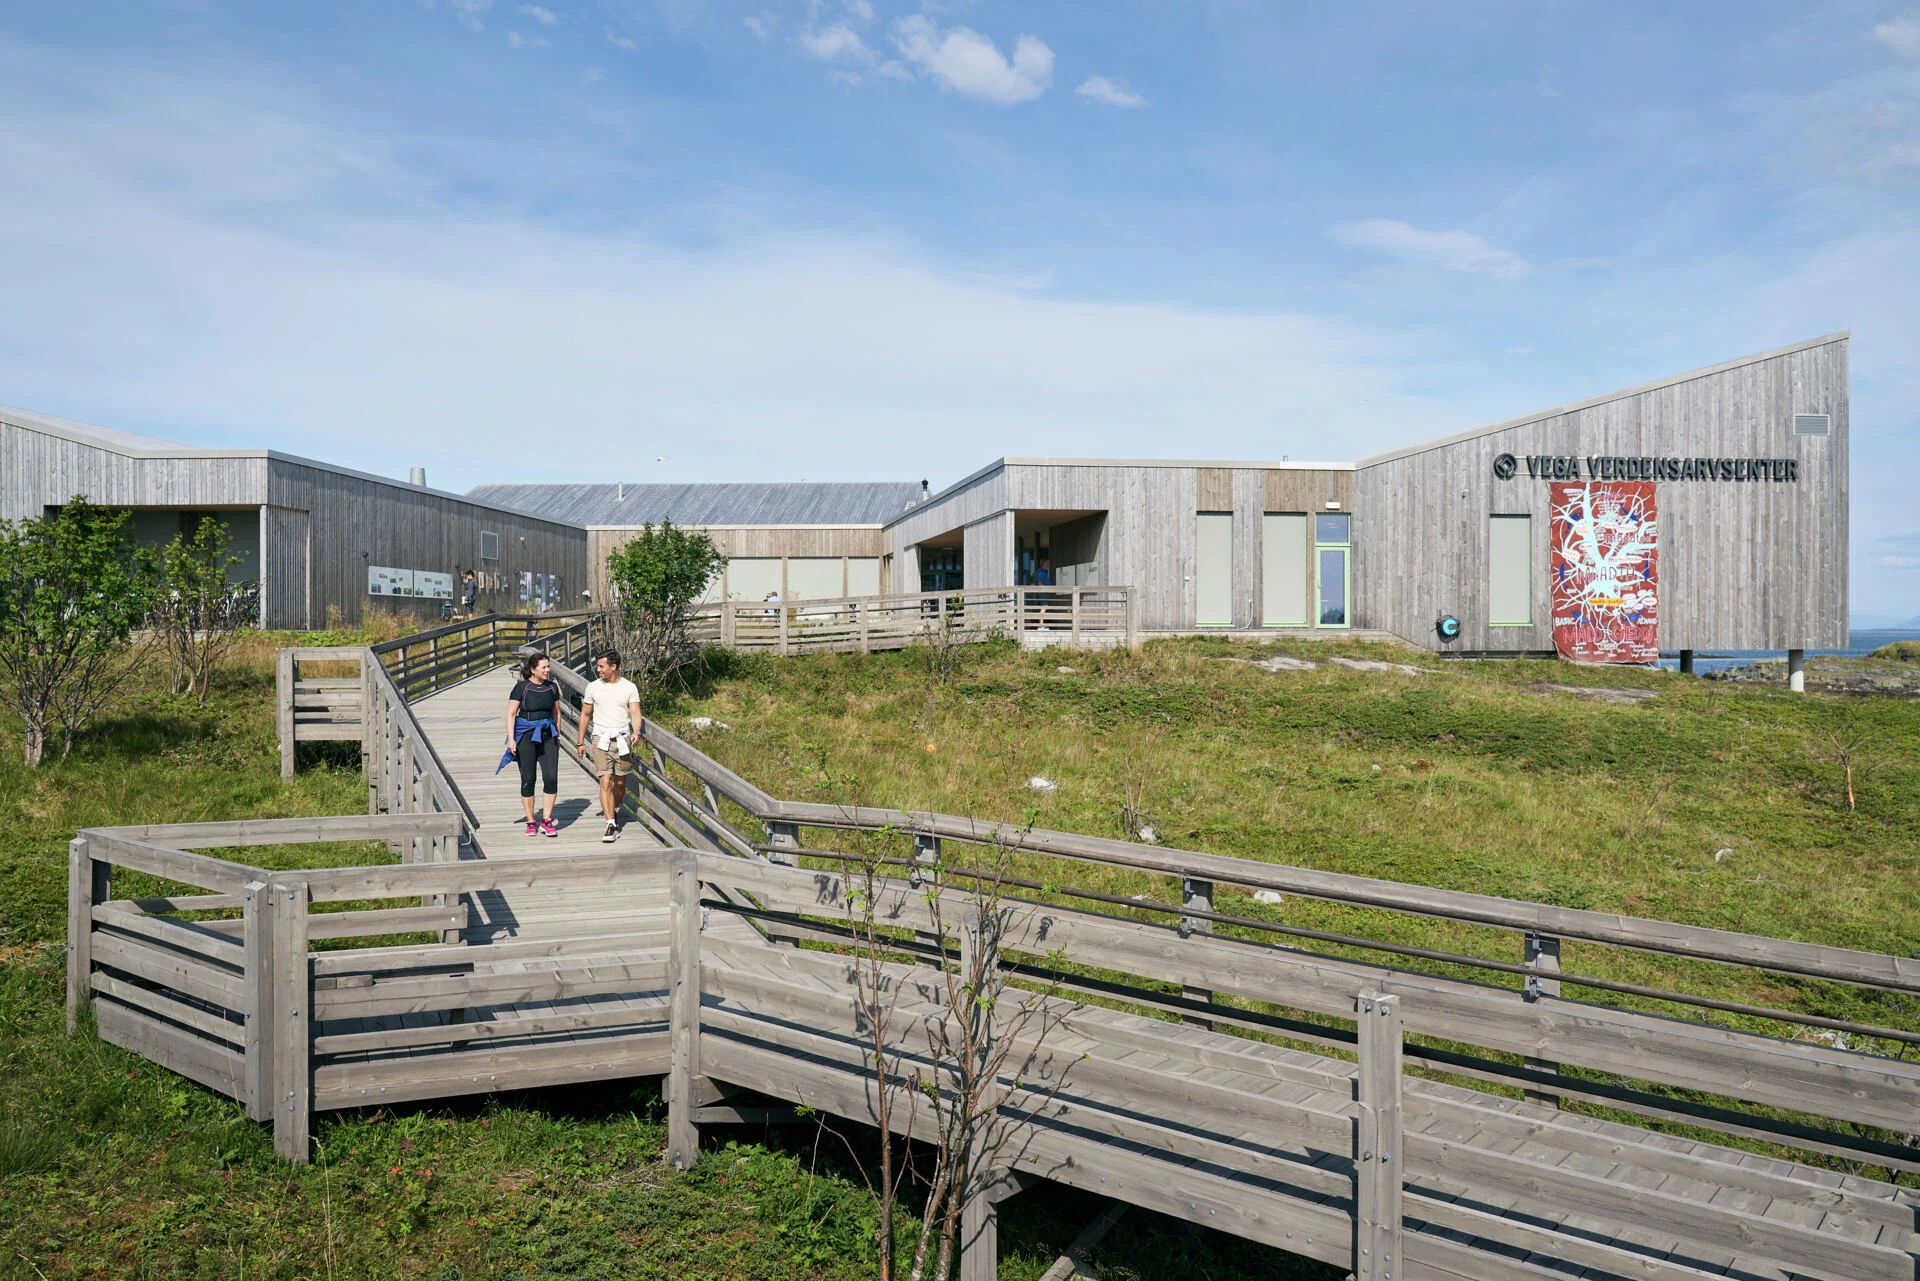 A couple explore the Vega Heritage Centre on the UNESCO-listed Vega Islands in Norway